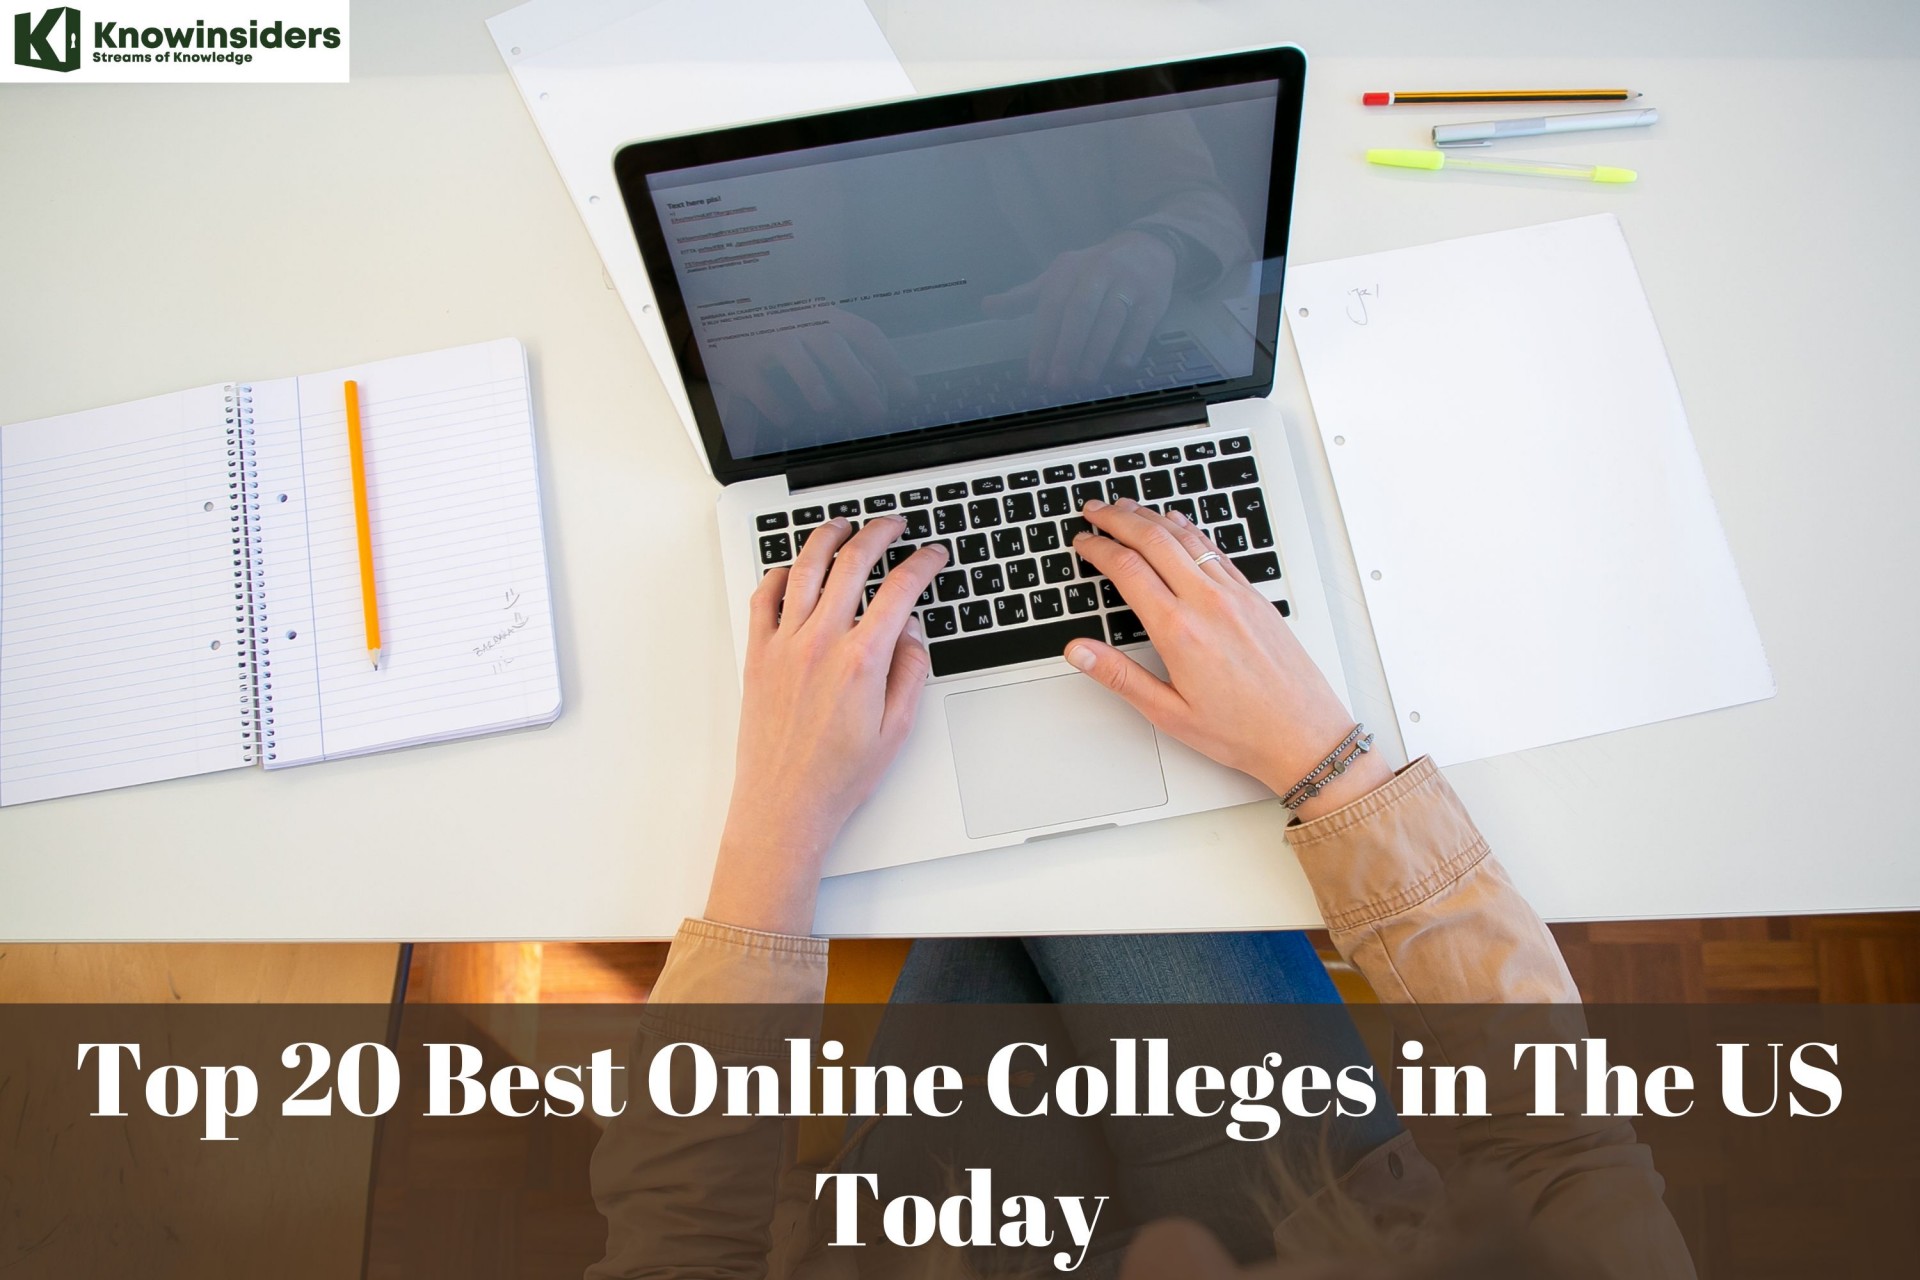 Top 20 Most Prestigious Online Colleges in The US